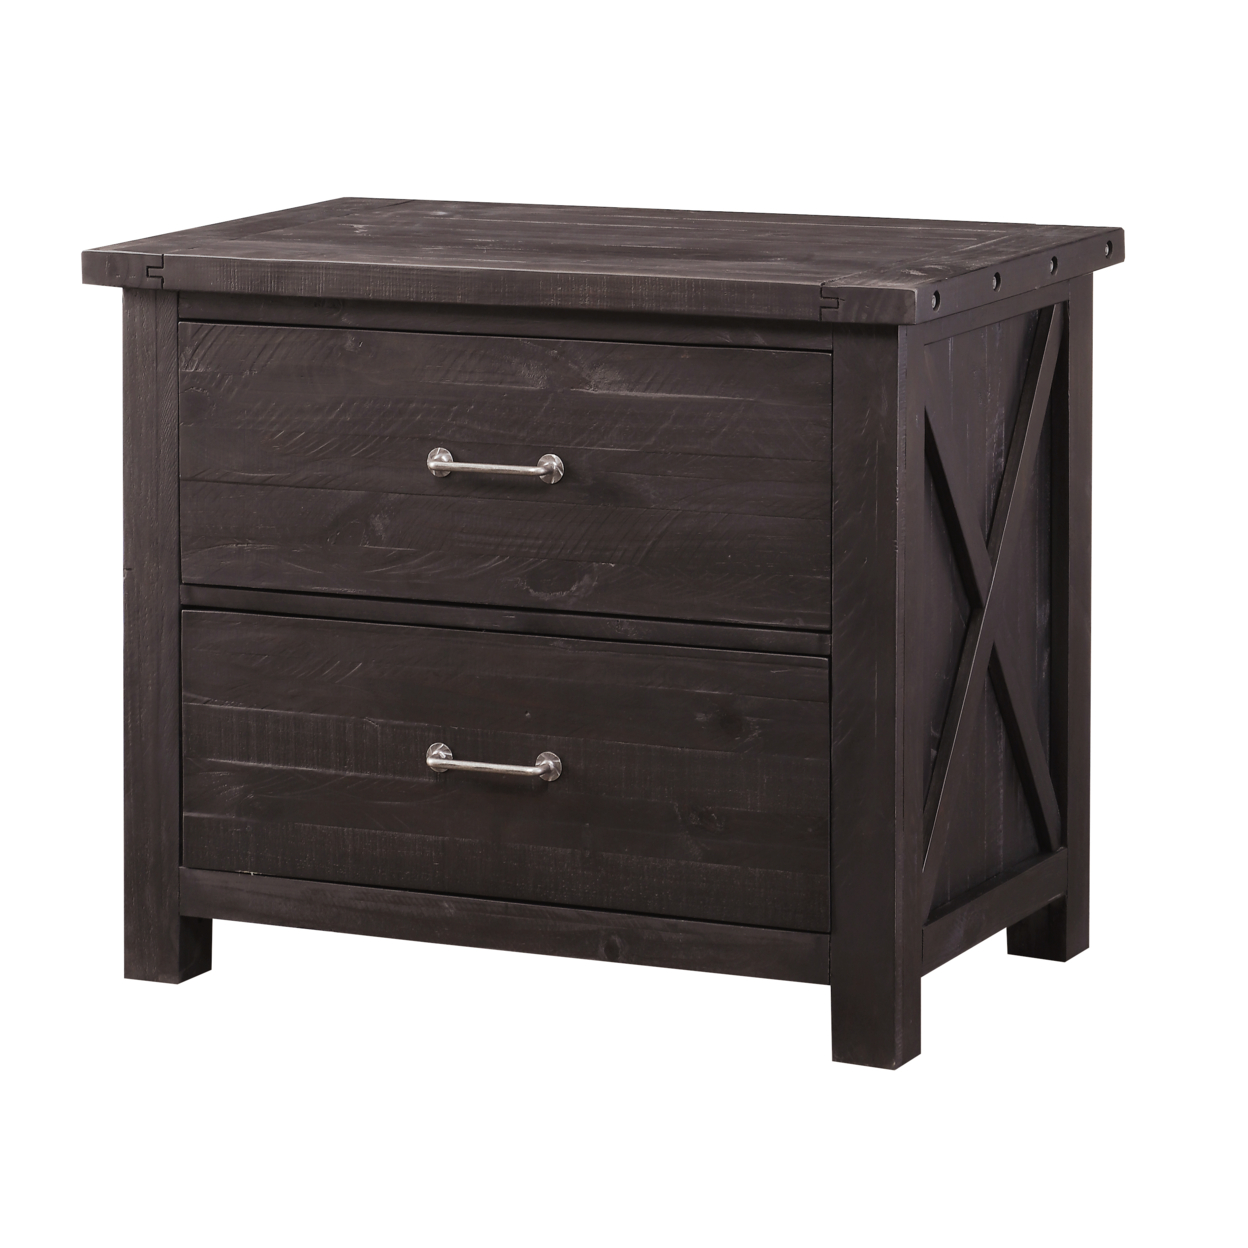 Two Drawer Wooden File Cabinet With Metal Handle Pull And Crossed Side Plank, Caf??? Brown- Saltoro Sherpi